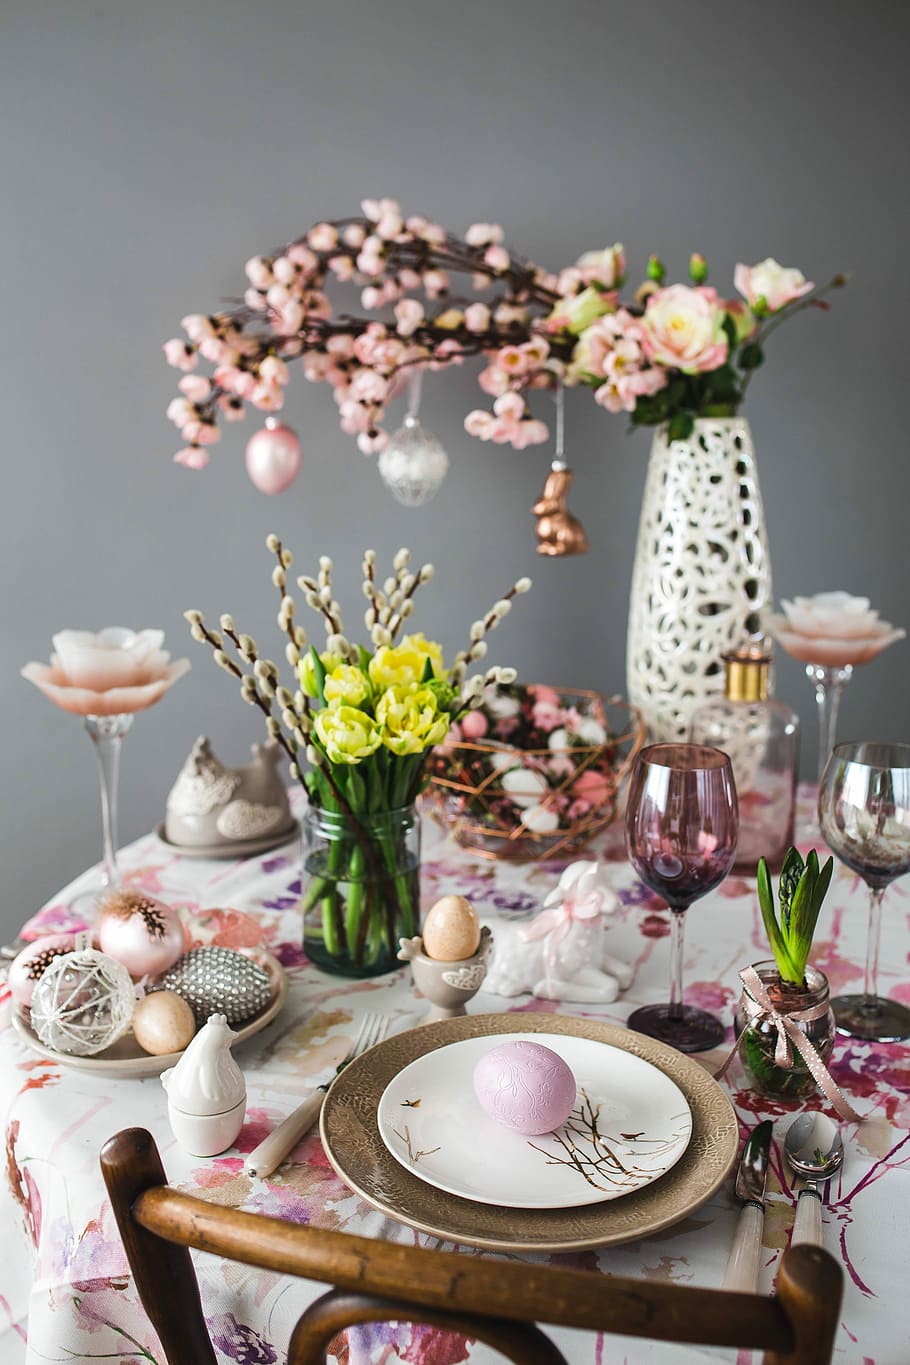 HD wallpaper: Easter table with cute pink decorations, flowers